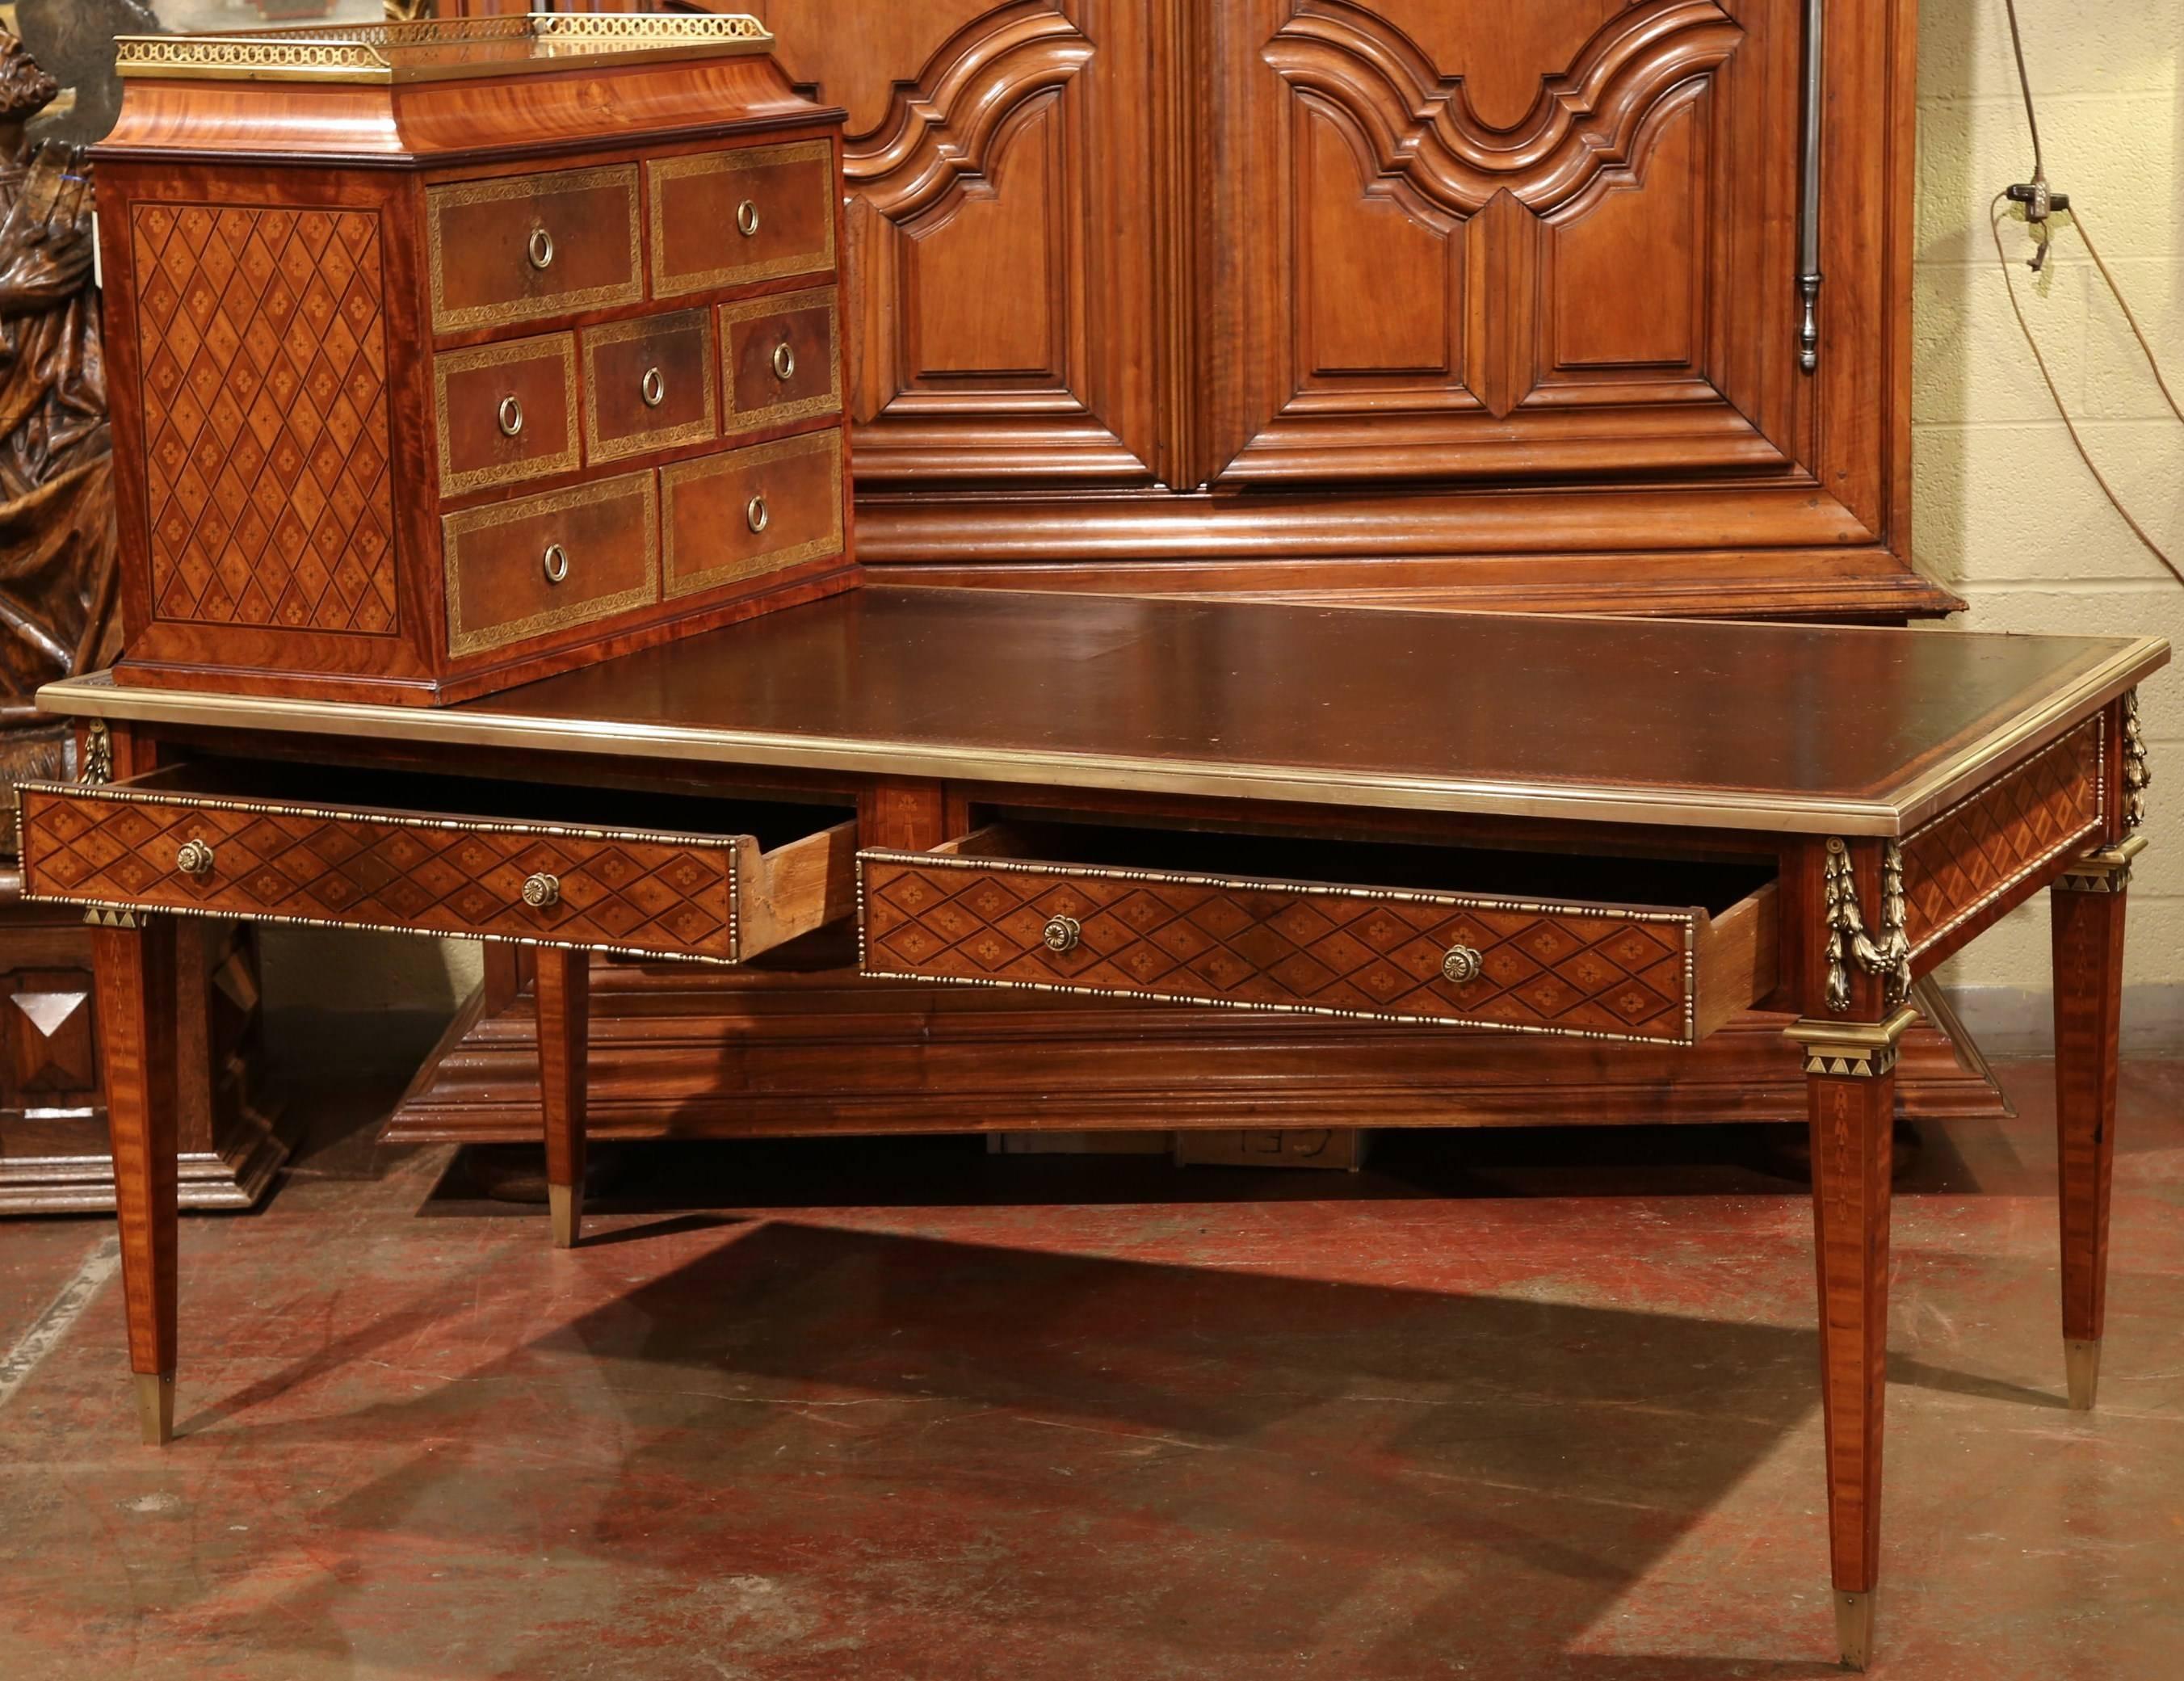 Hand-Carved 19th Century French Louis XVI Writing Desk with Black Leather Top and Cartonnier